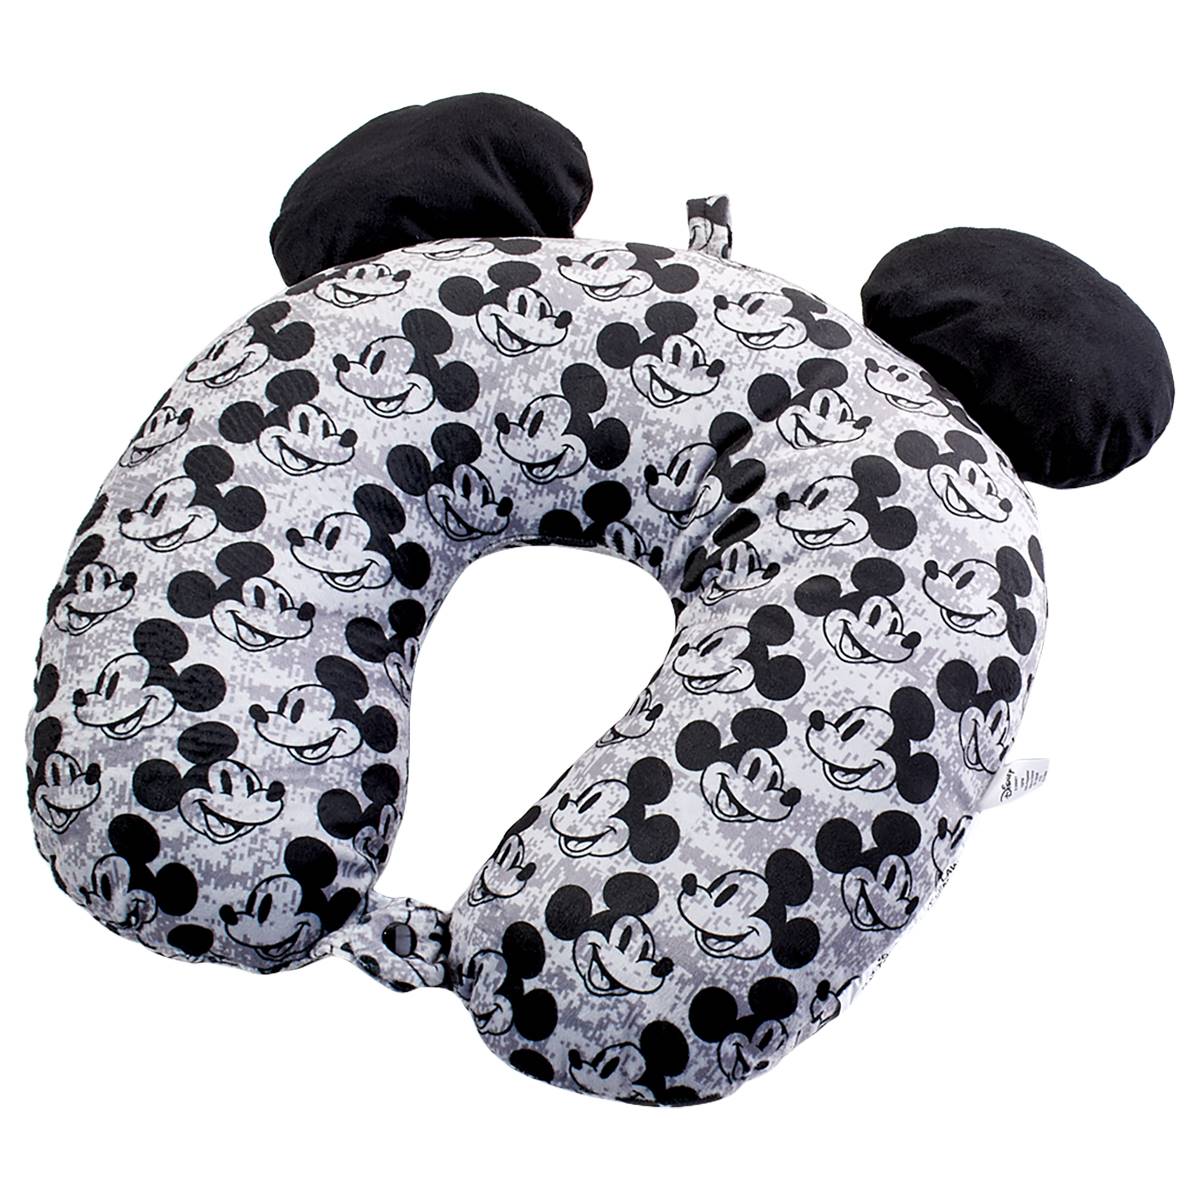 Mickey Mouse Neck Pillow - Grey